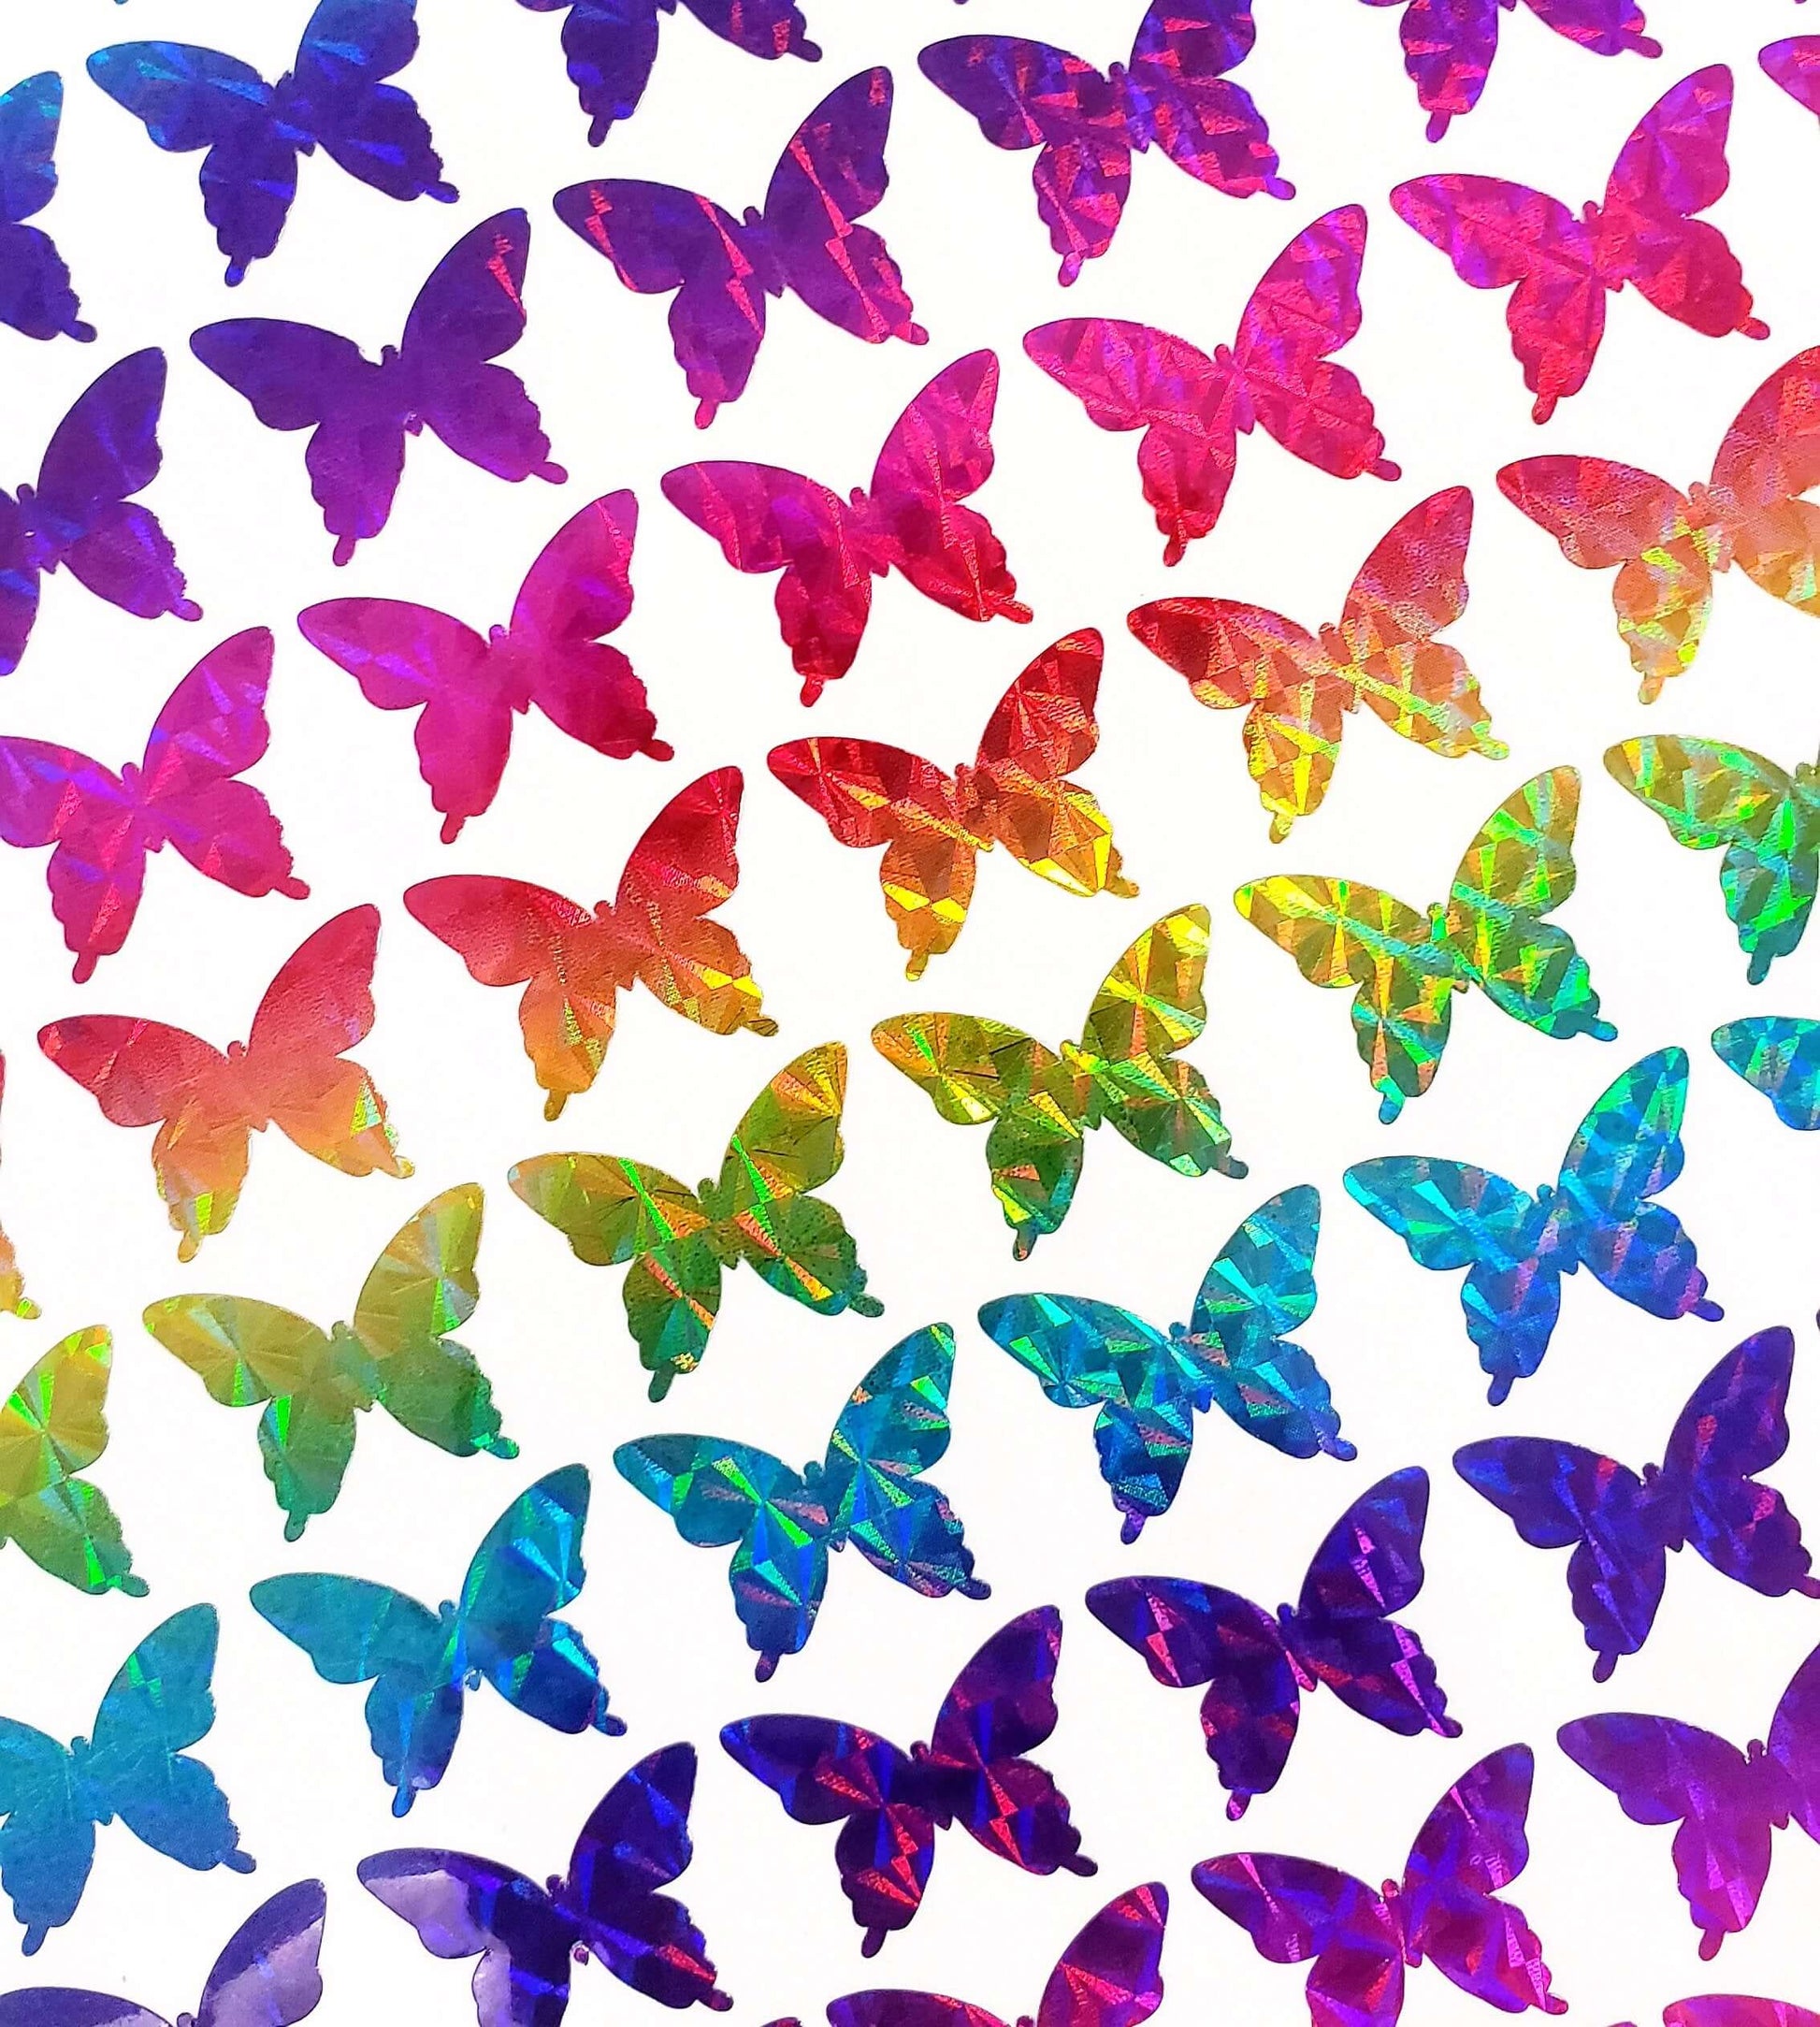 Rainbow Butterfly Stickers – Fairy Dust Decals